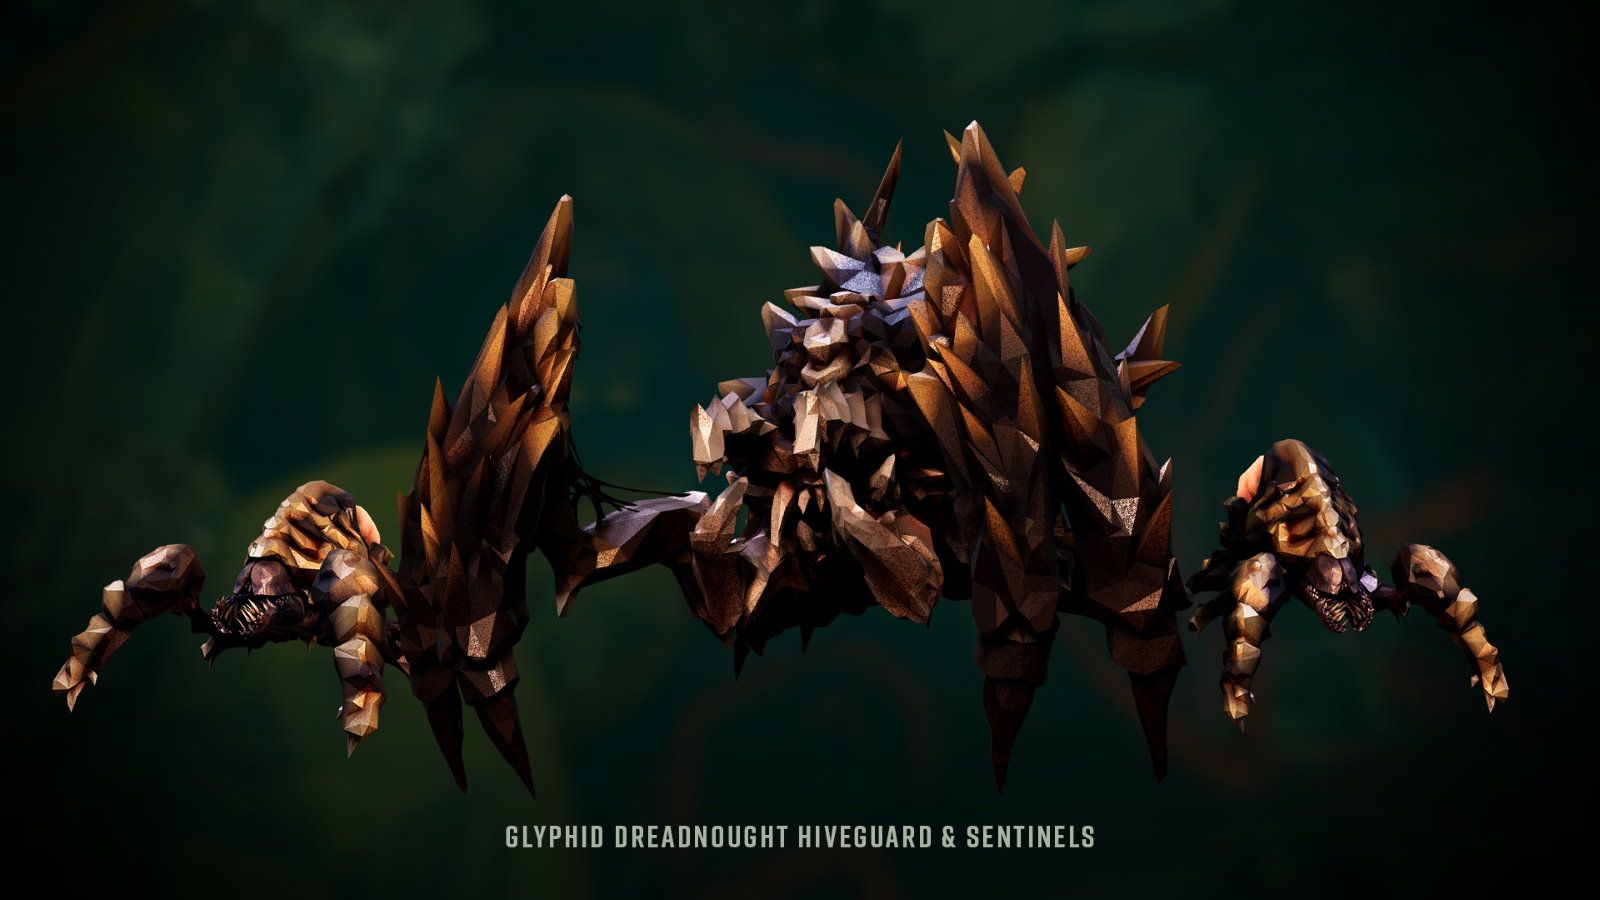 Glyphid Dreadnaught and Sentinels